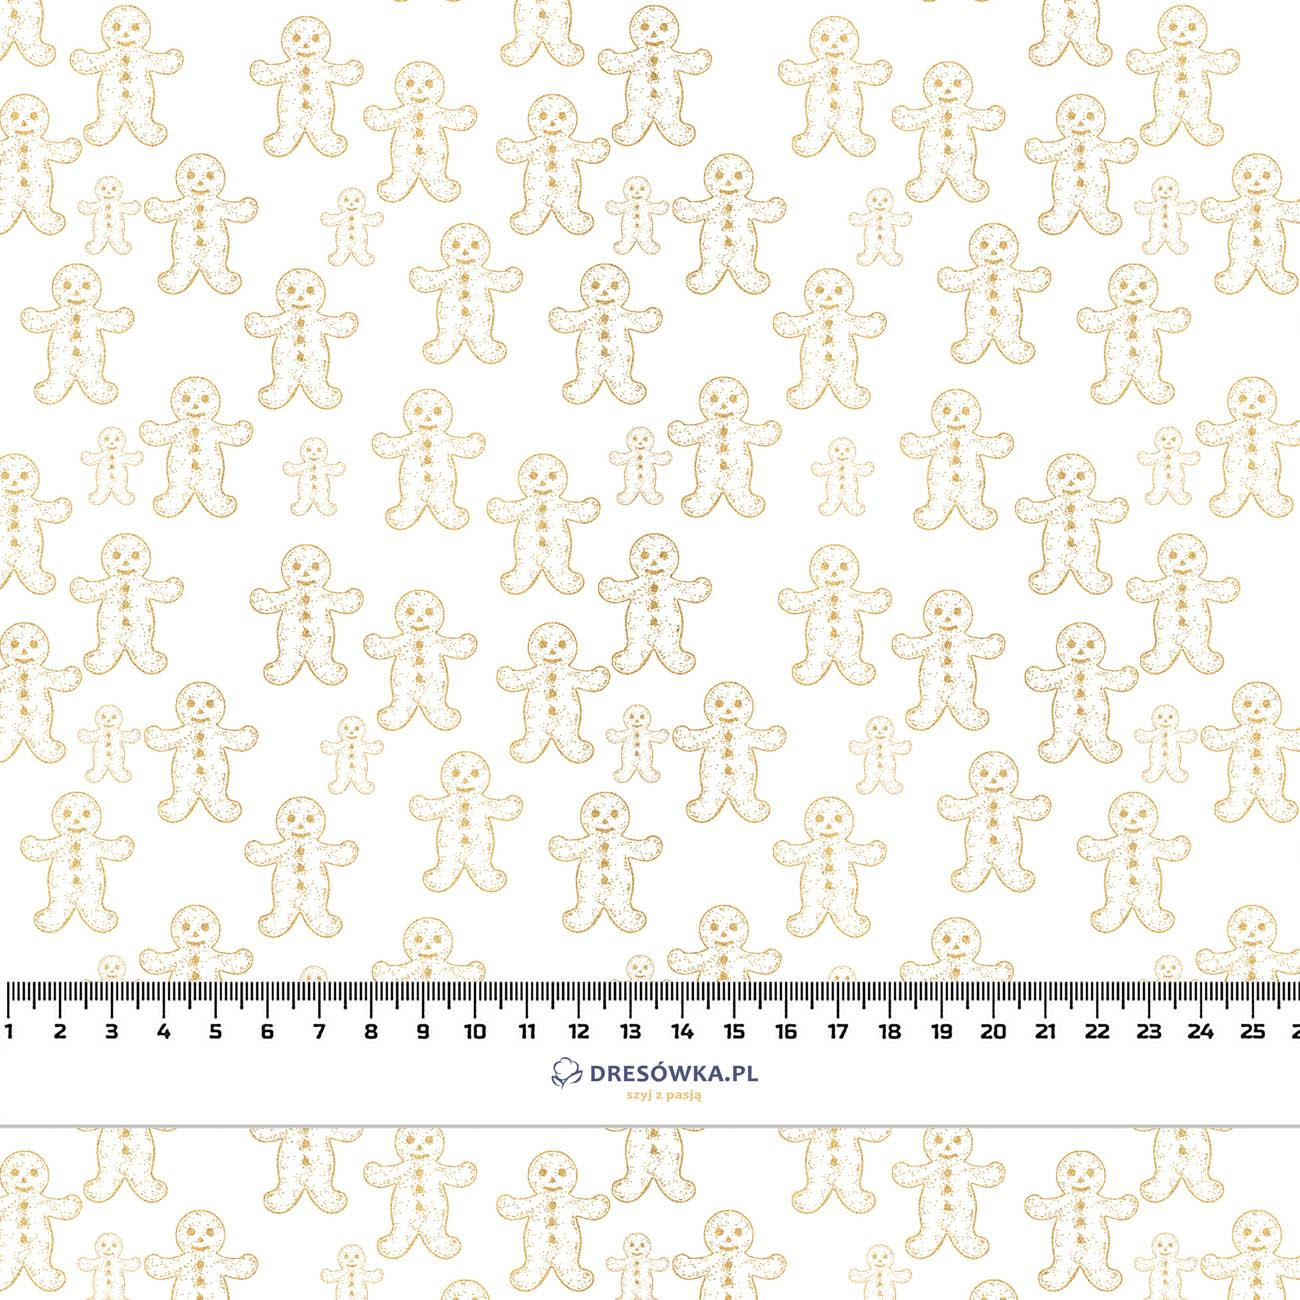 GOLDEN GINGERBREAD MEN (WHITE CHRISTMAS) - looped knit fabric